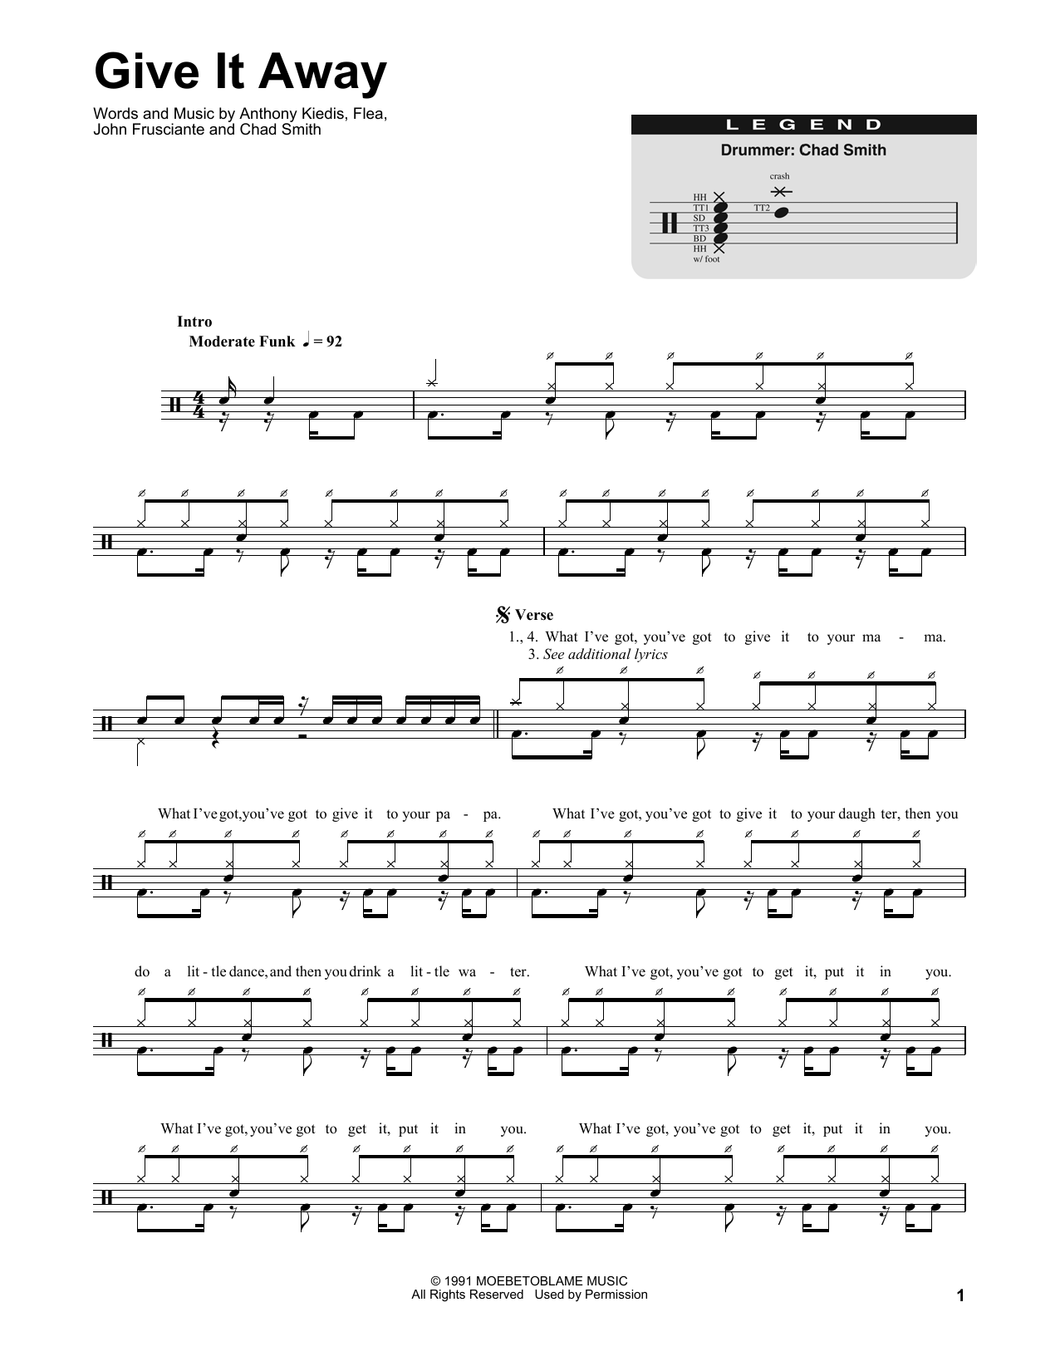 Give It Away - Red Hot Chili Peppers - Full Drum Transcription / Drum Sheet Music - SheetMusicDirect DT175162